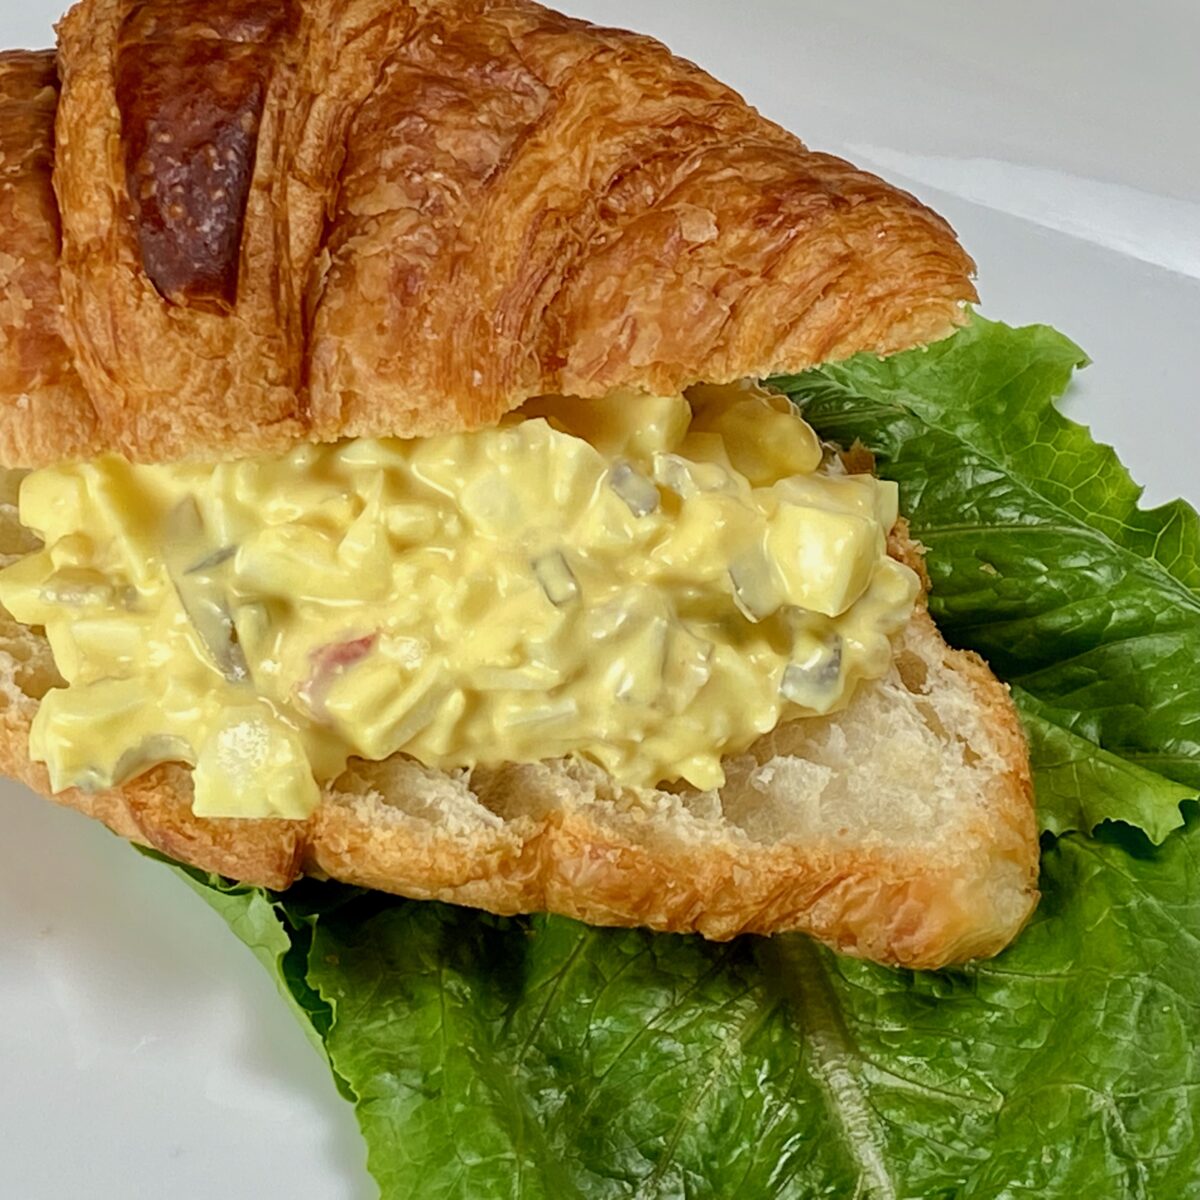 Egg salad with relish on a croissant, served on a bed of lettuce.